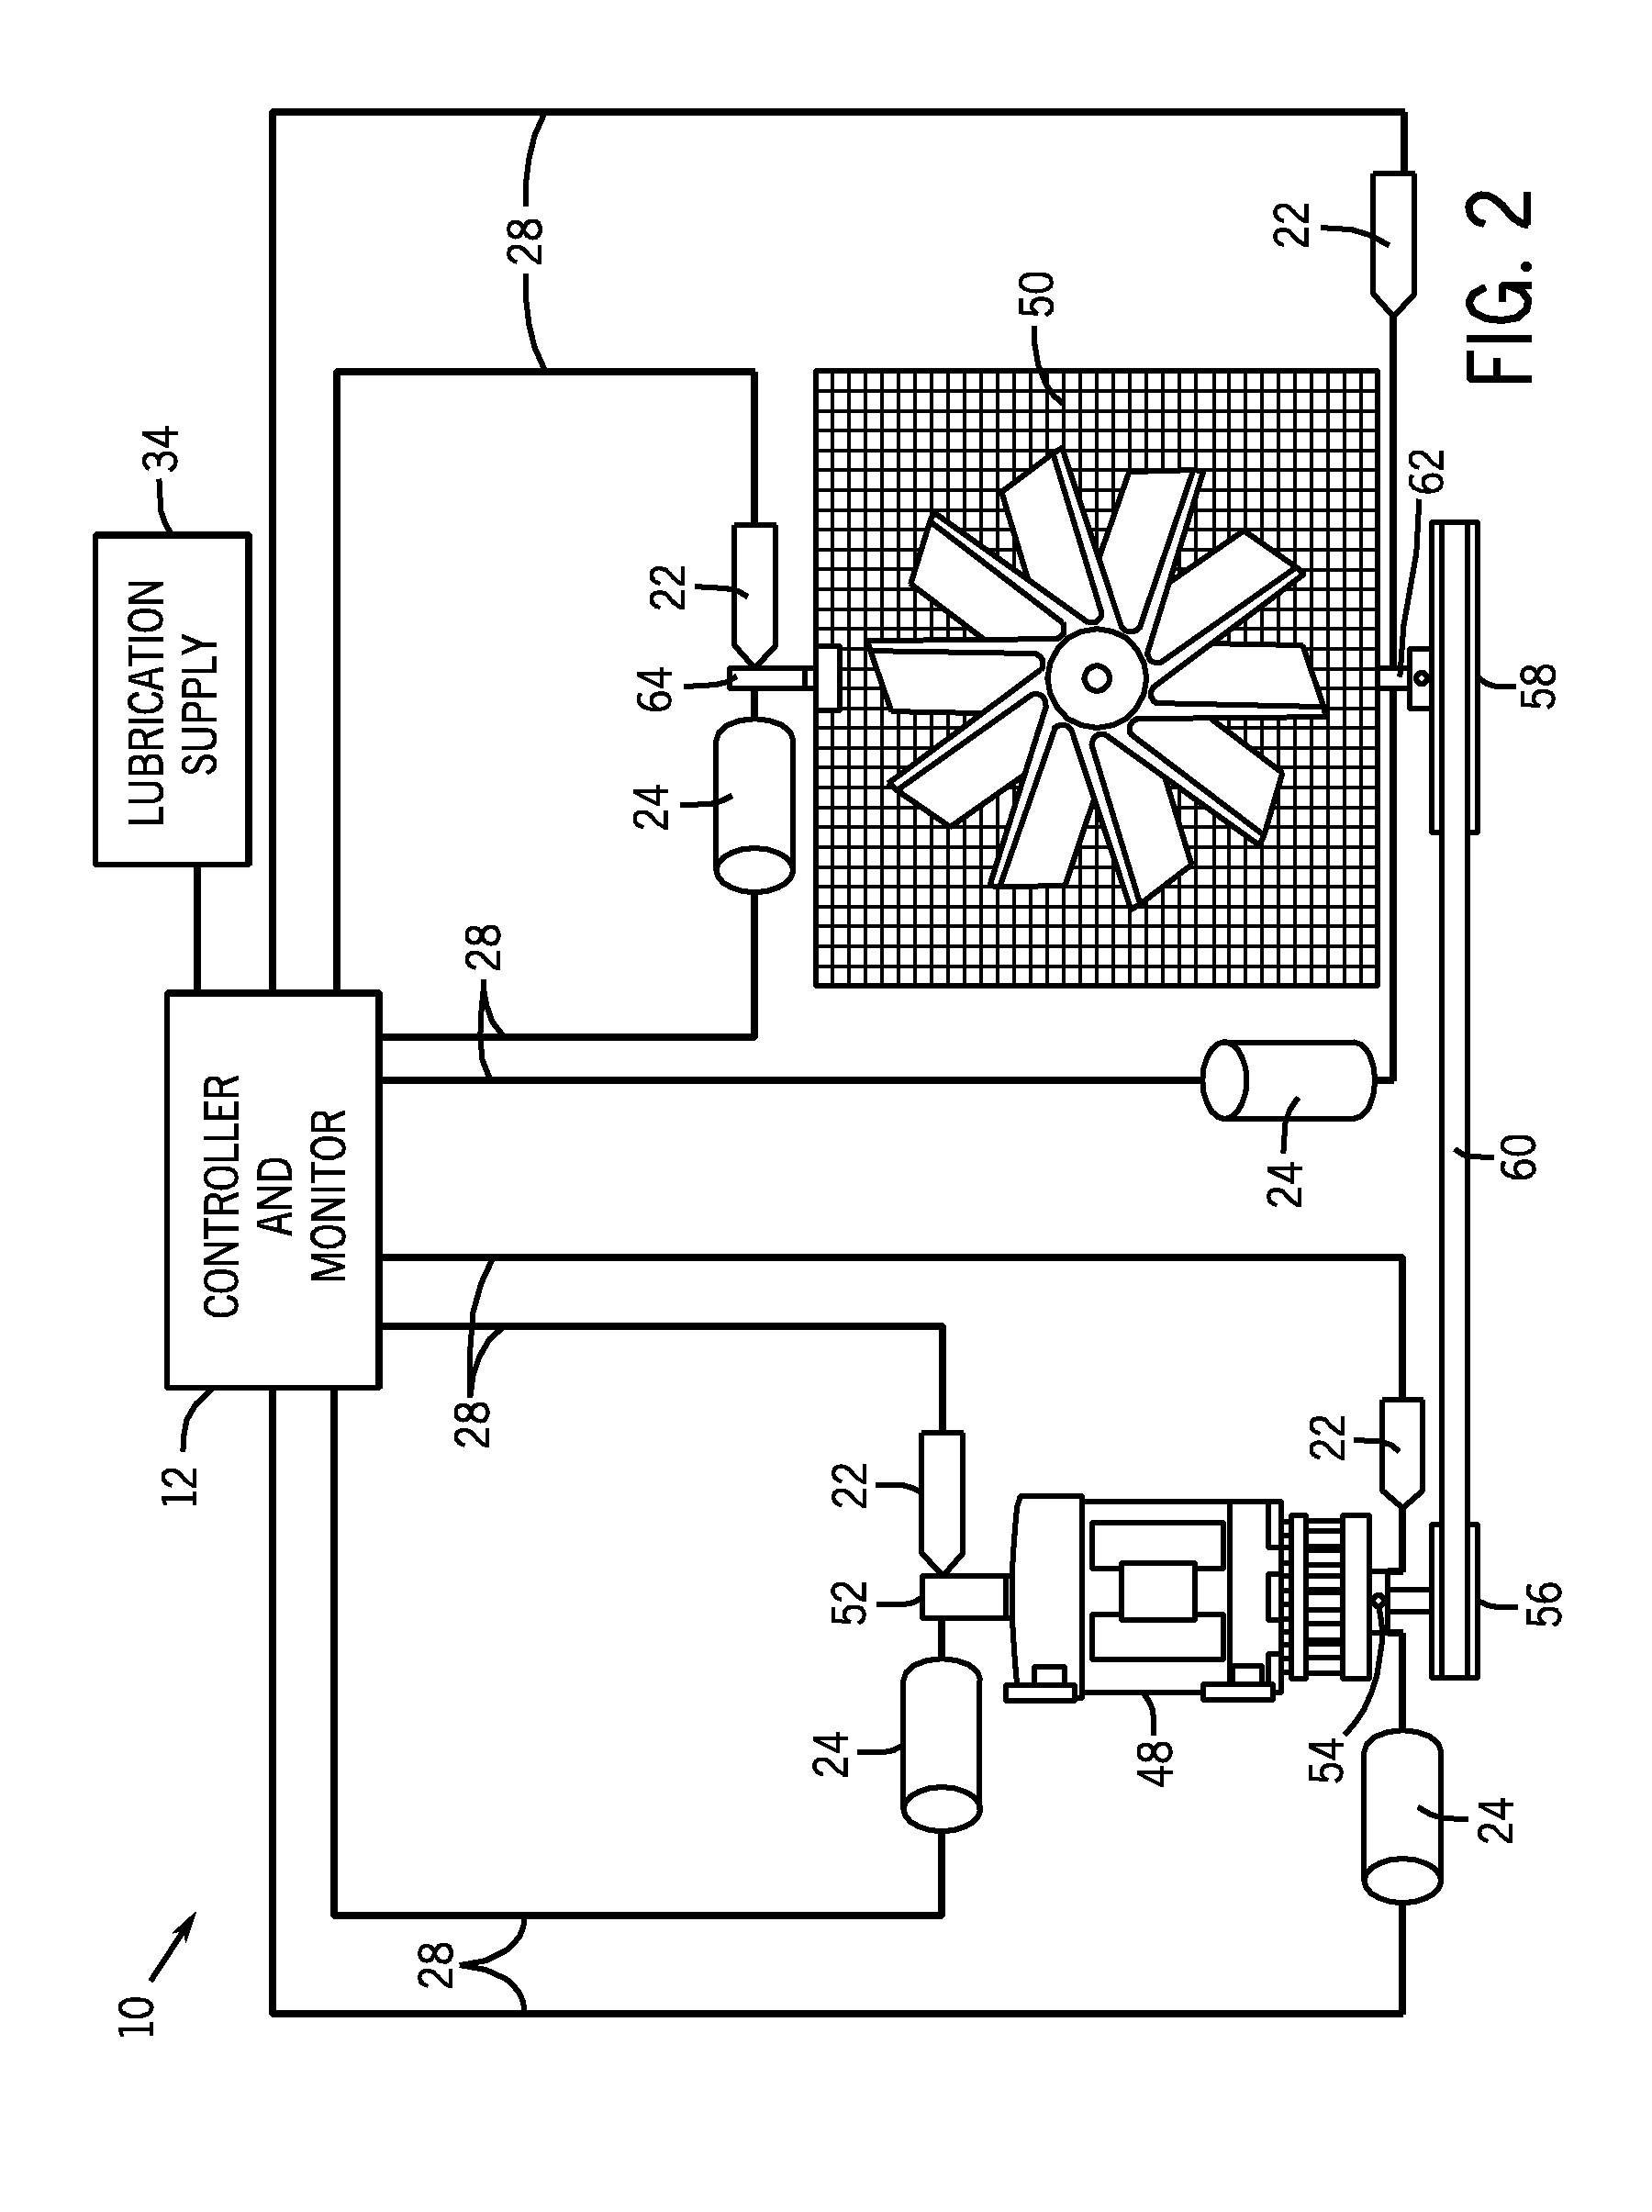 Machine conditioning monitoring closed loop lubrication system and method